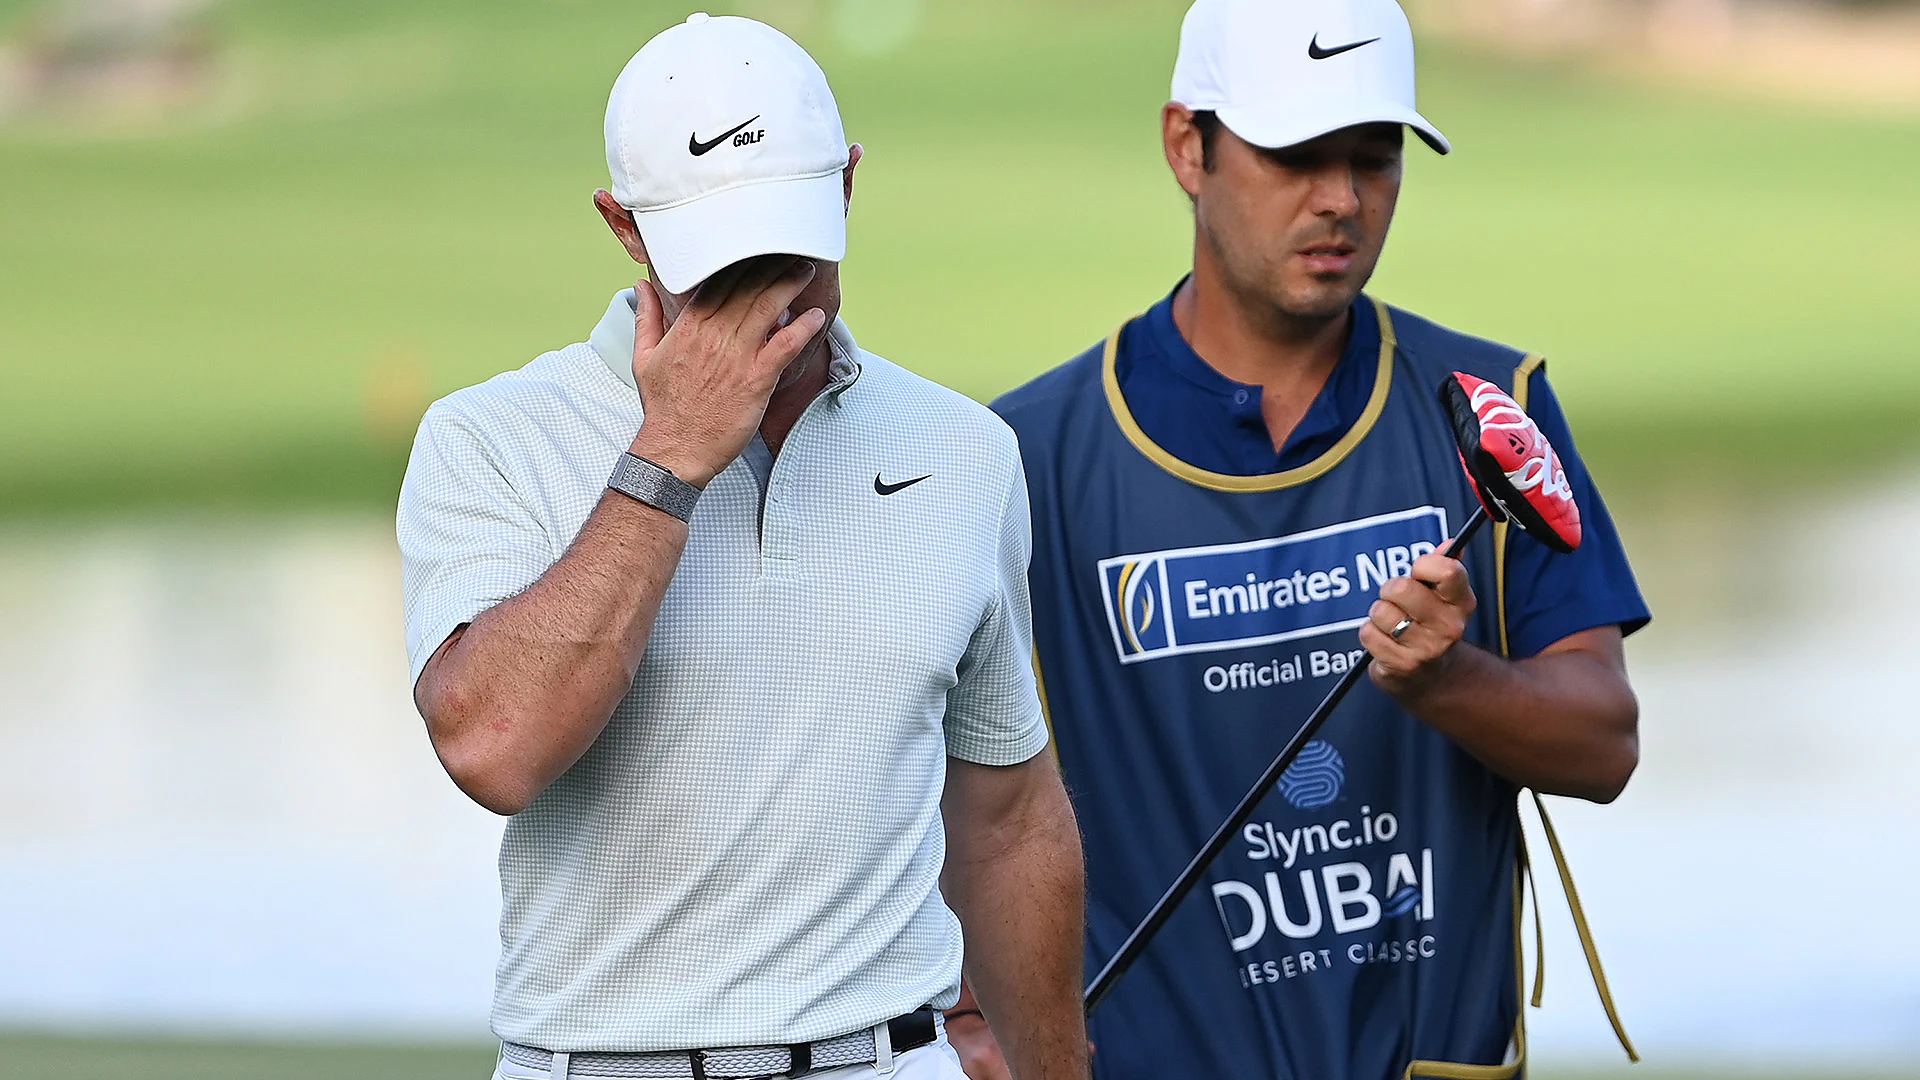 Rory McIlroy implodes in finish to lose Dubai Desert Classic